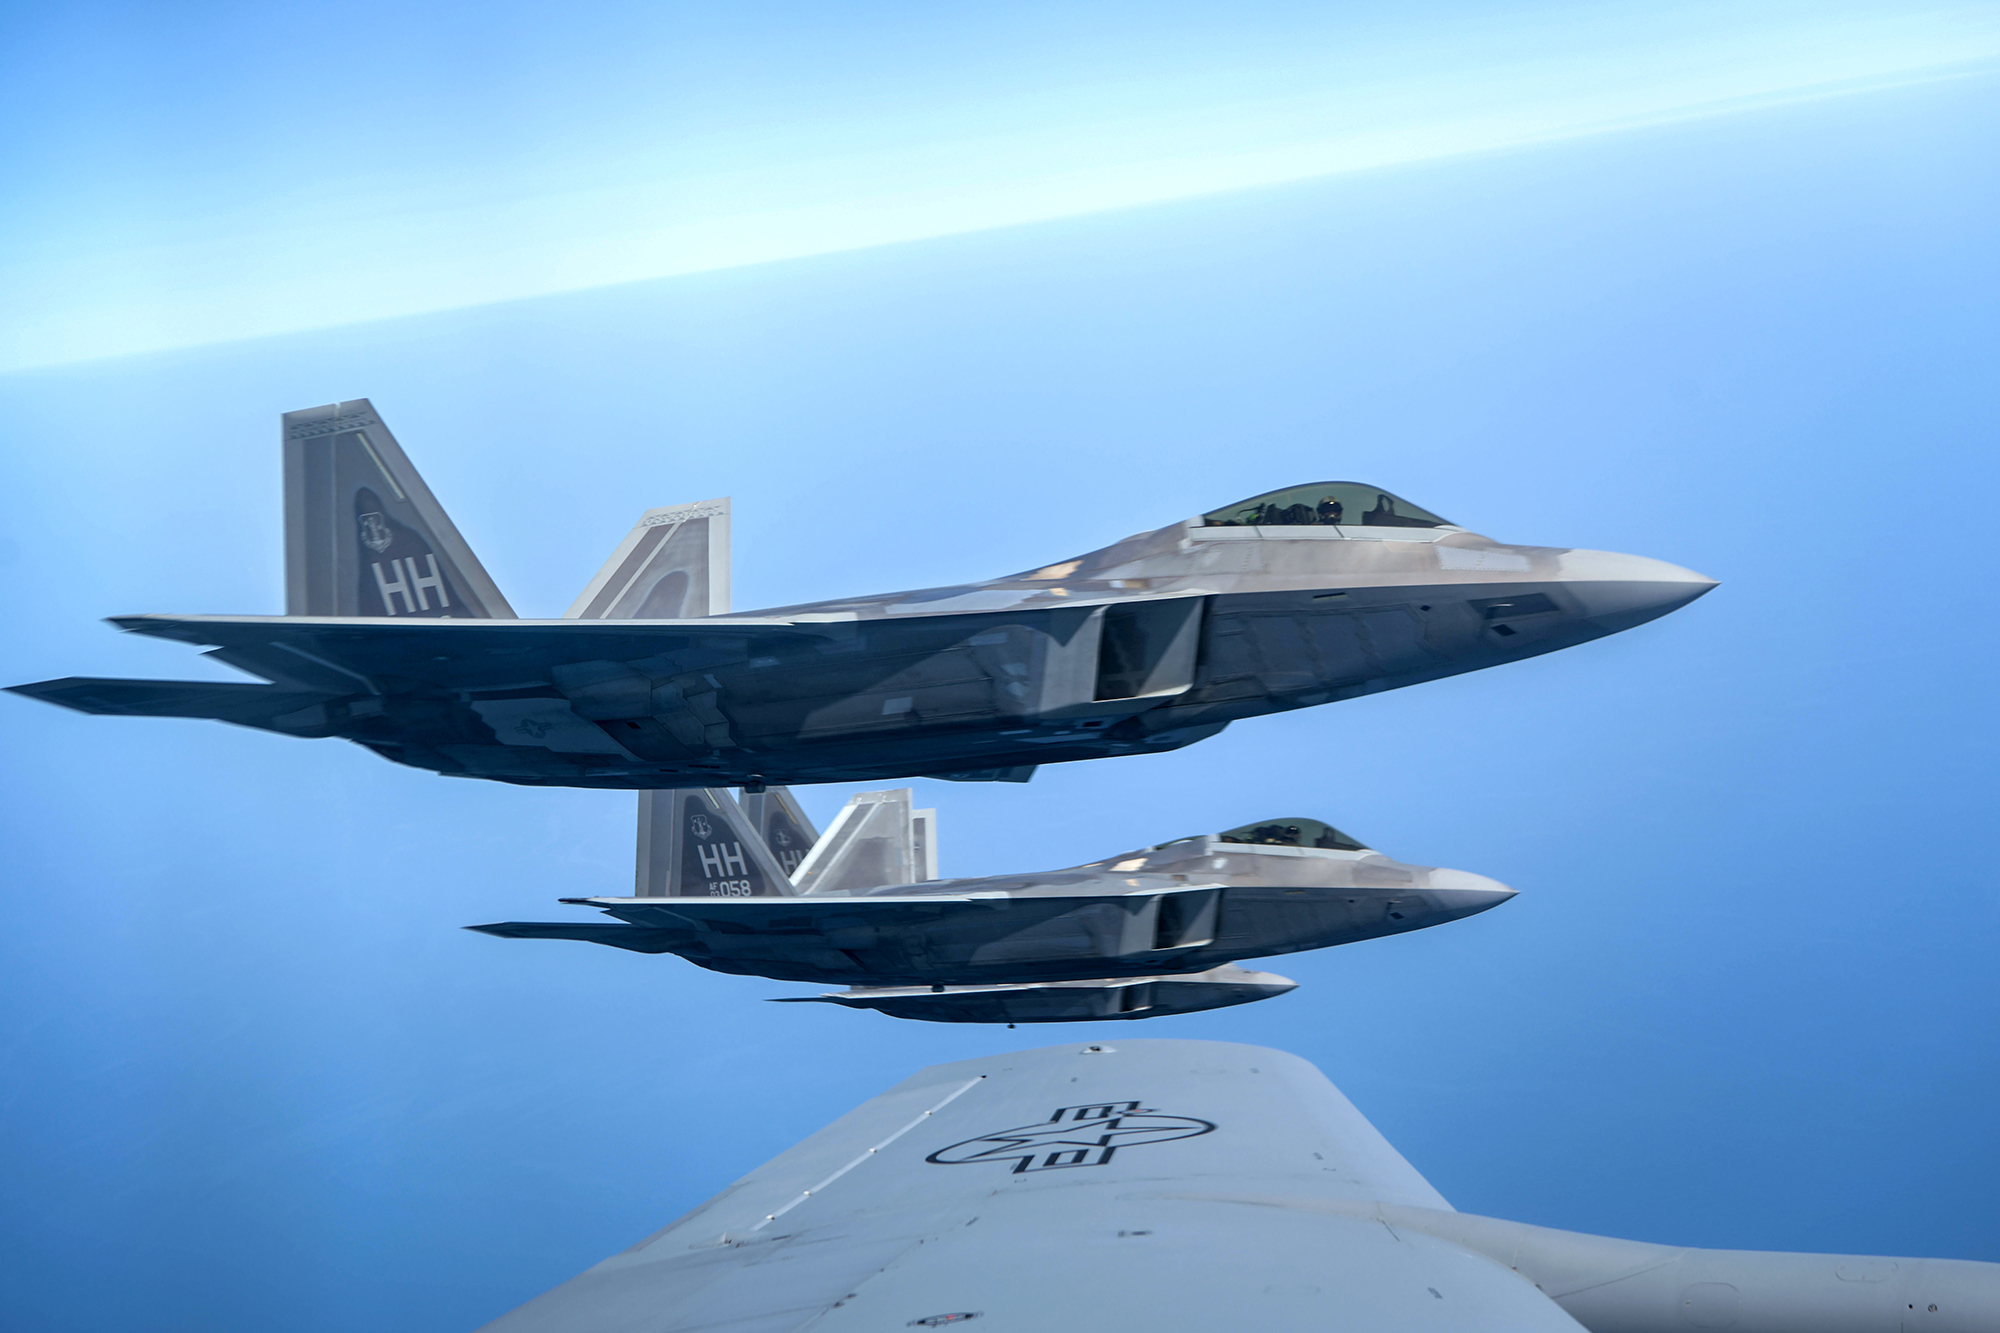 USAF may convert some F-15Cs to radar jammers, News